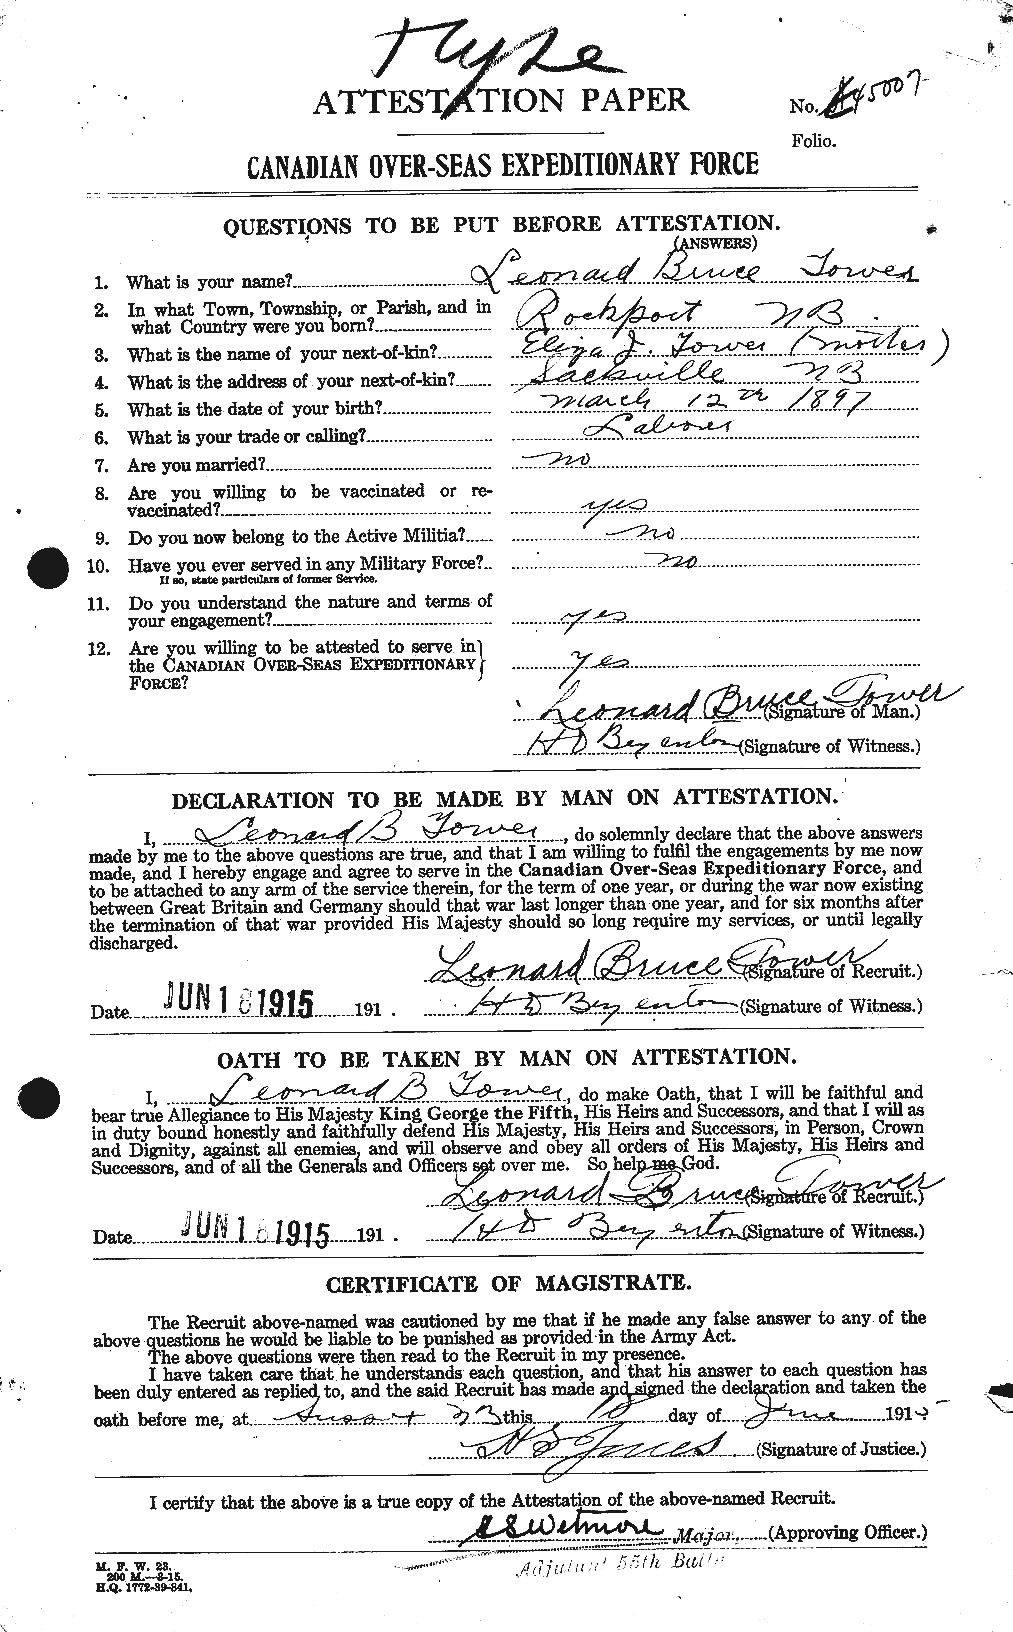 Personnel Records of the First World War - CEF 636197a